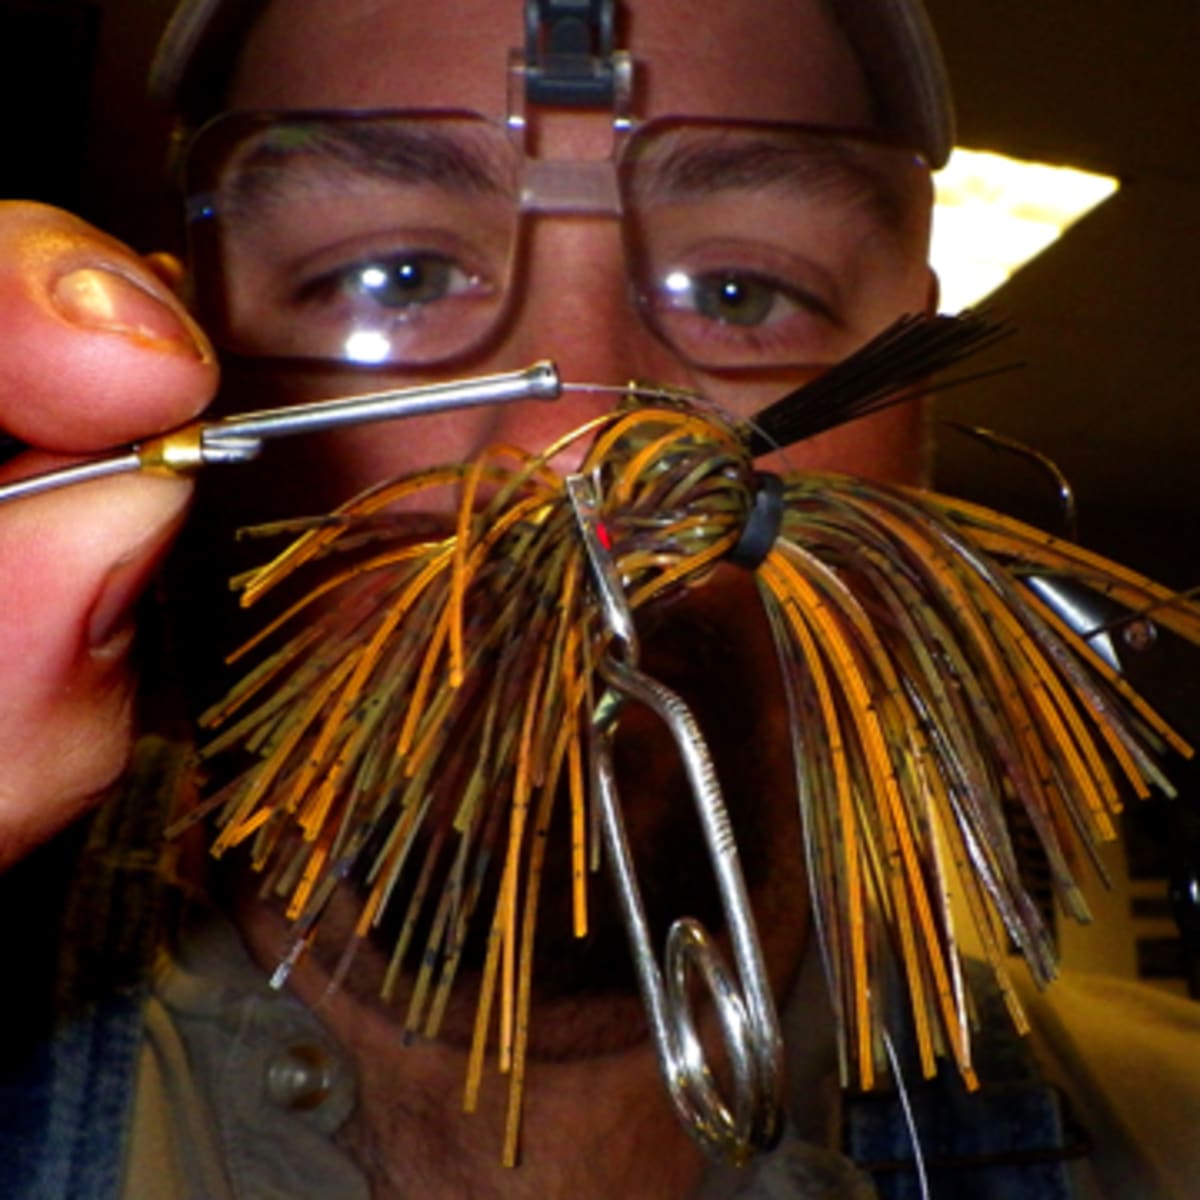 Fly-Tying Skirt Saver - The Tip of the Week Presented by Jackson Kayak -  Men's Journal